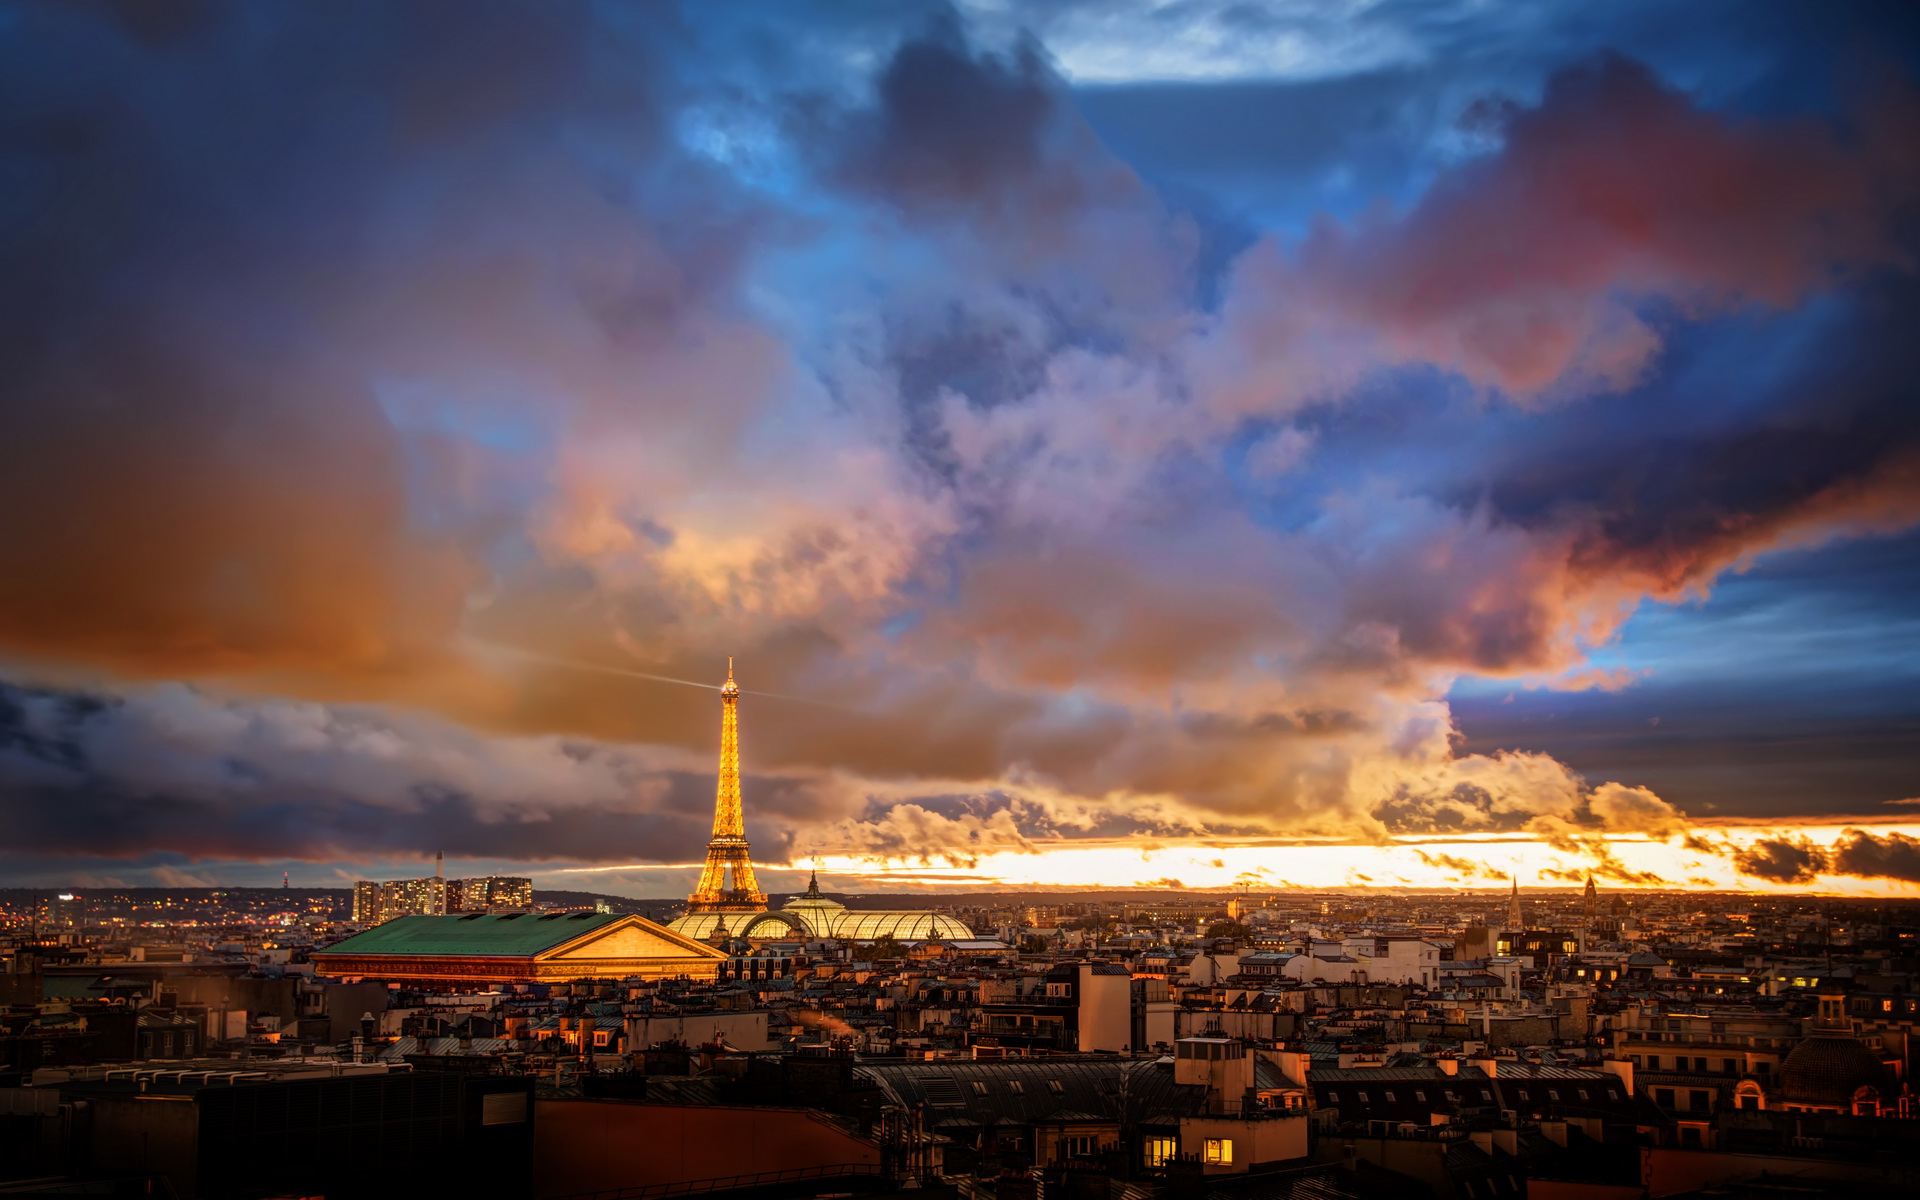 france, Paris, Cities, Hdr, Night, Lights, Eiffel, Tower, Architecture, Buildings, Monument, Sky, Clouds, Scenic, Panorama Wallpaper